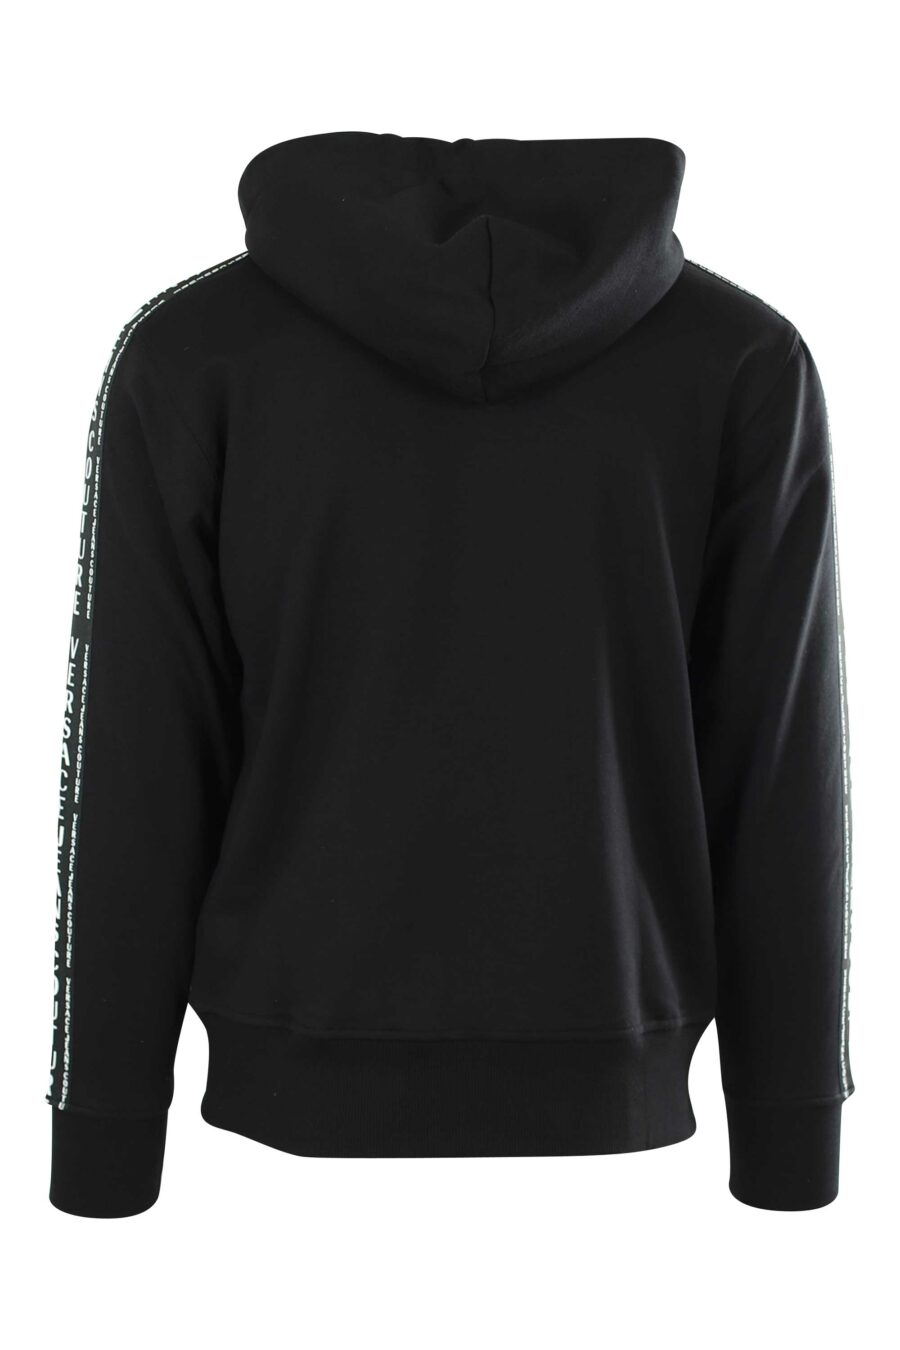 Black hoodie with zip and logo - 8052019321692 3